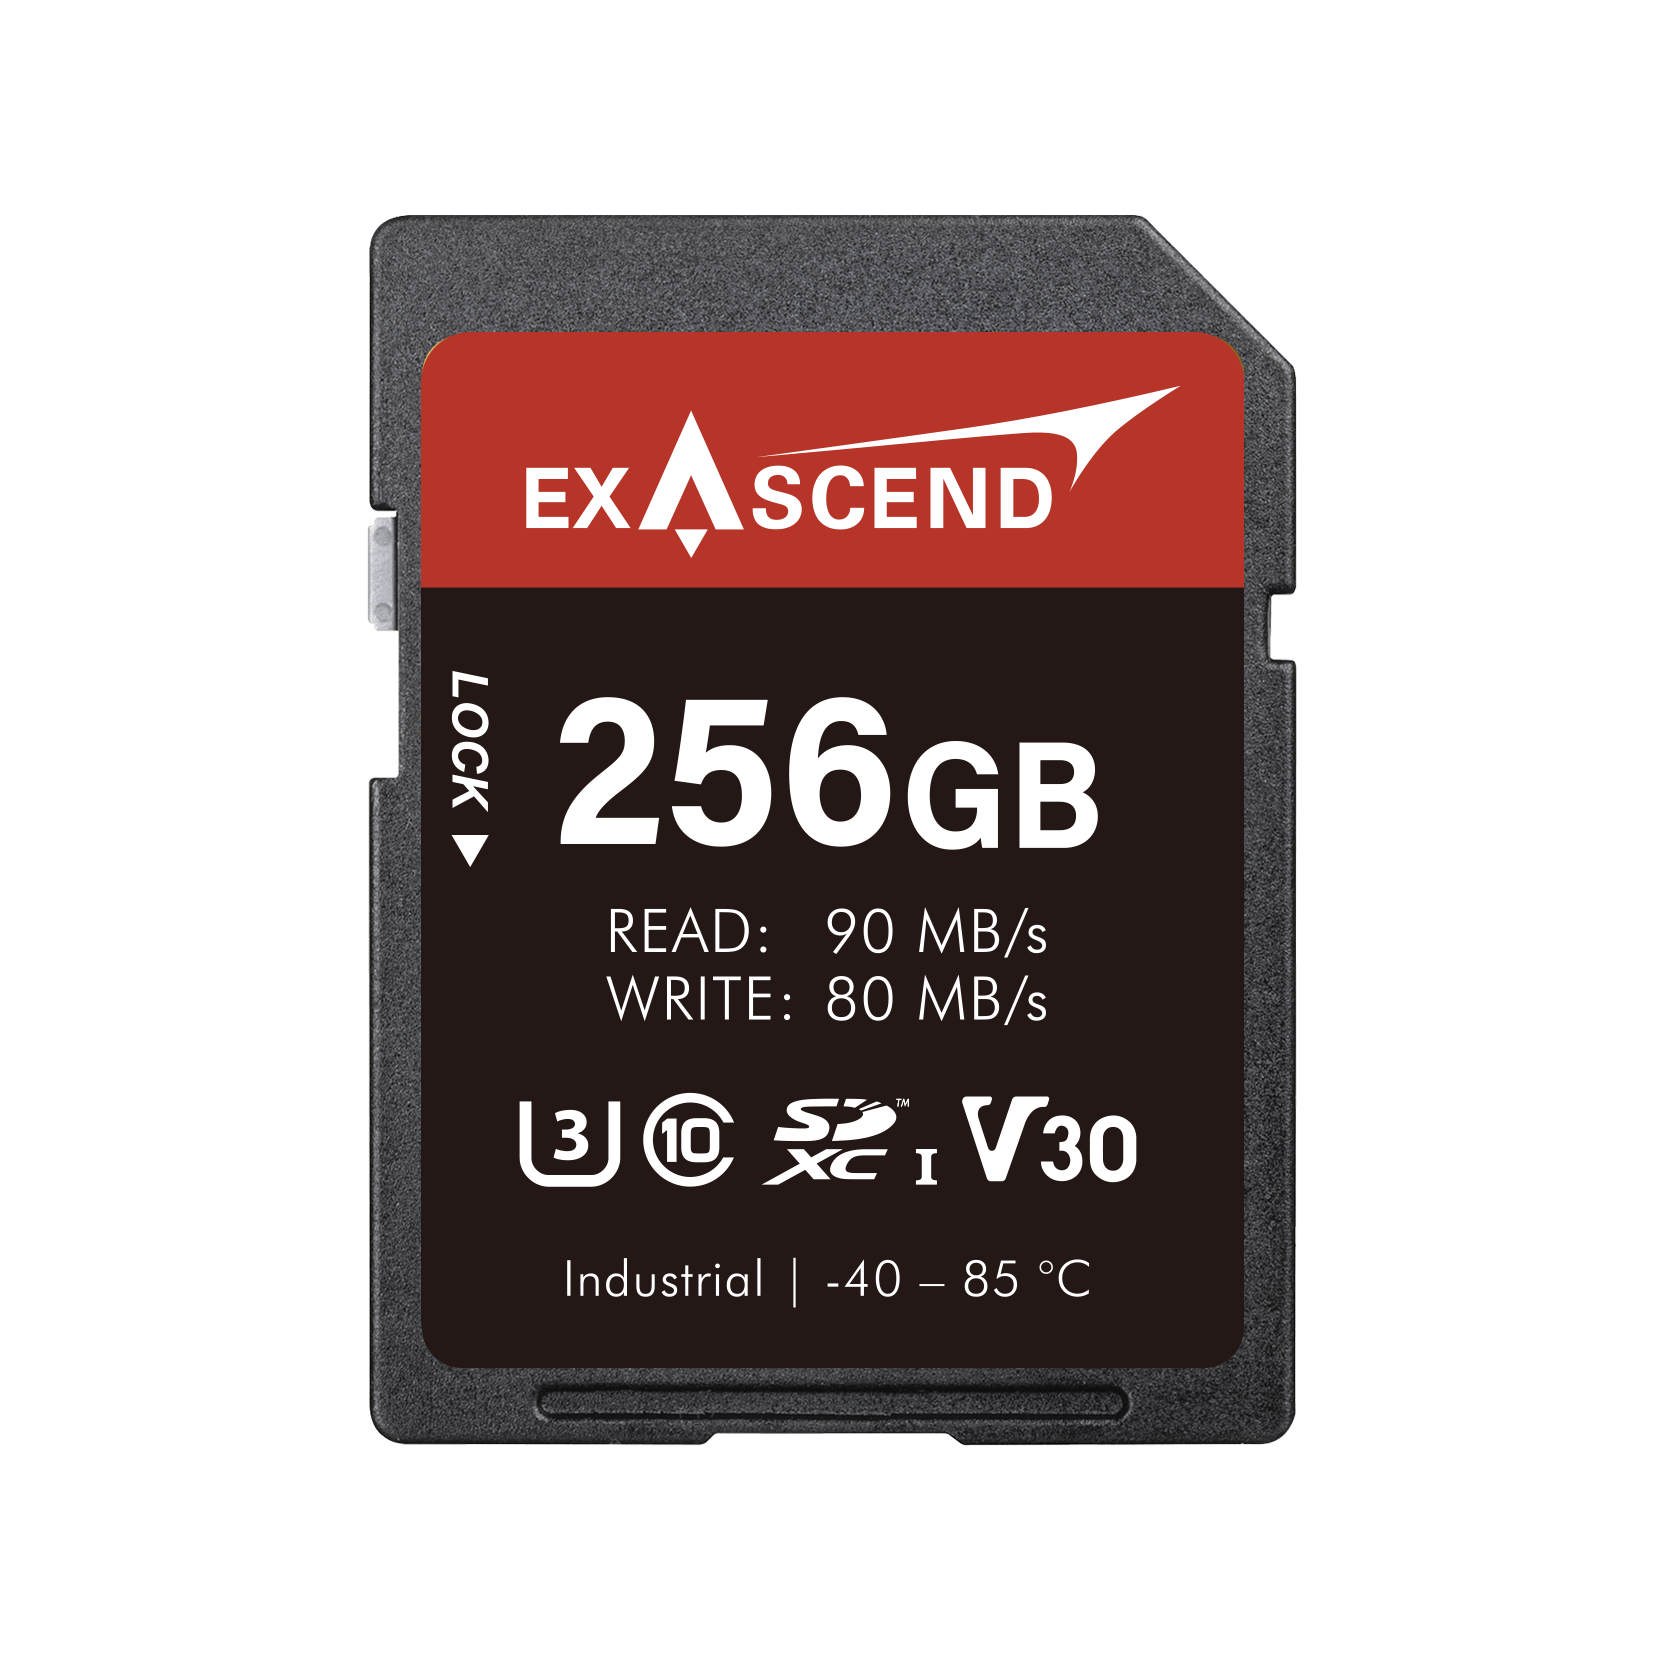 Industrial SD in 256 GB